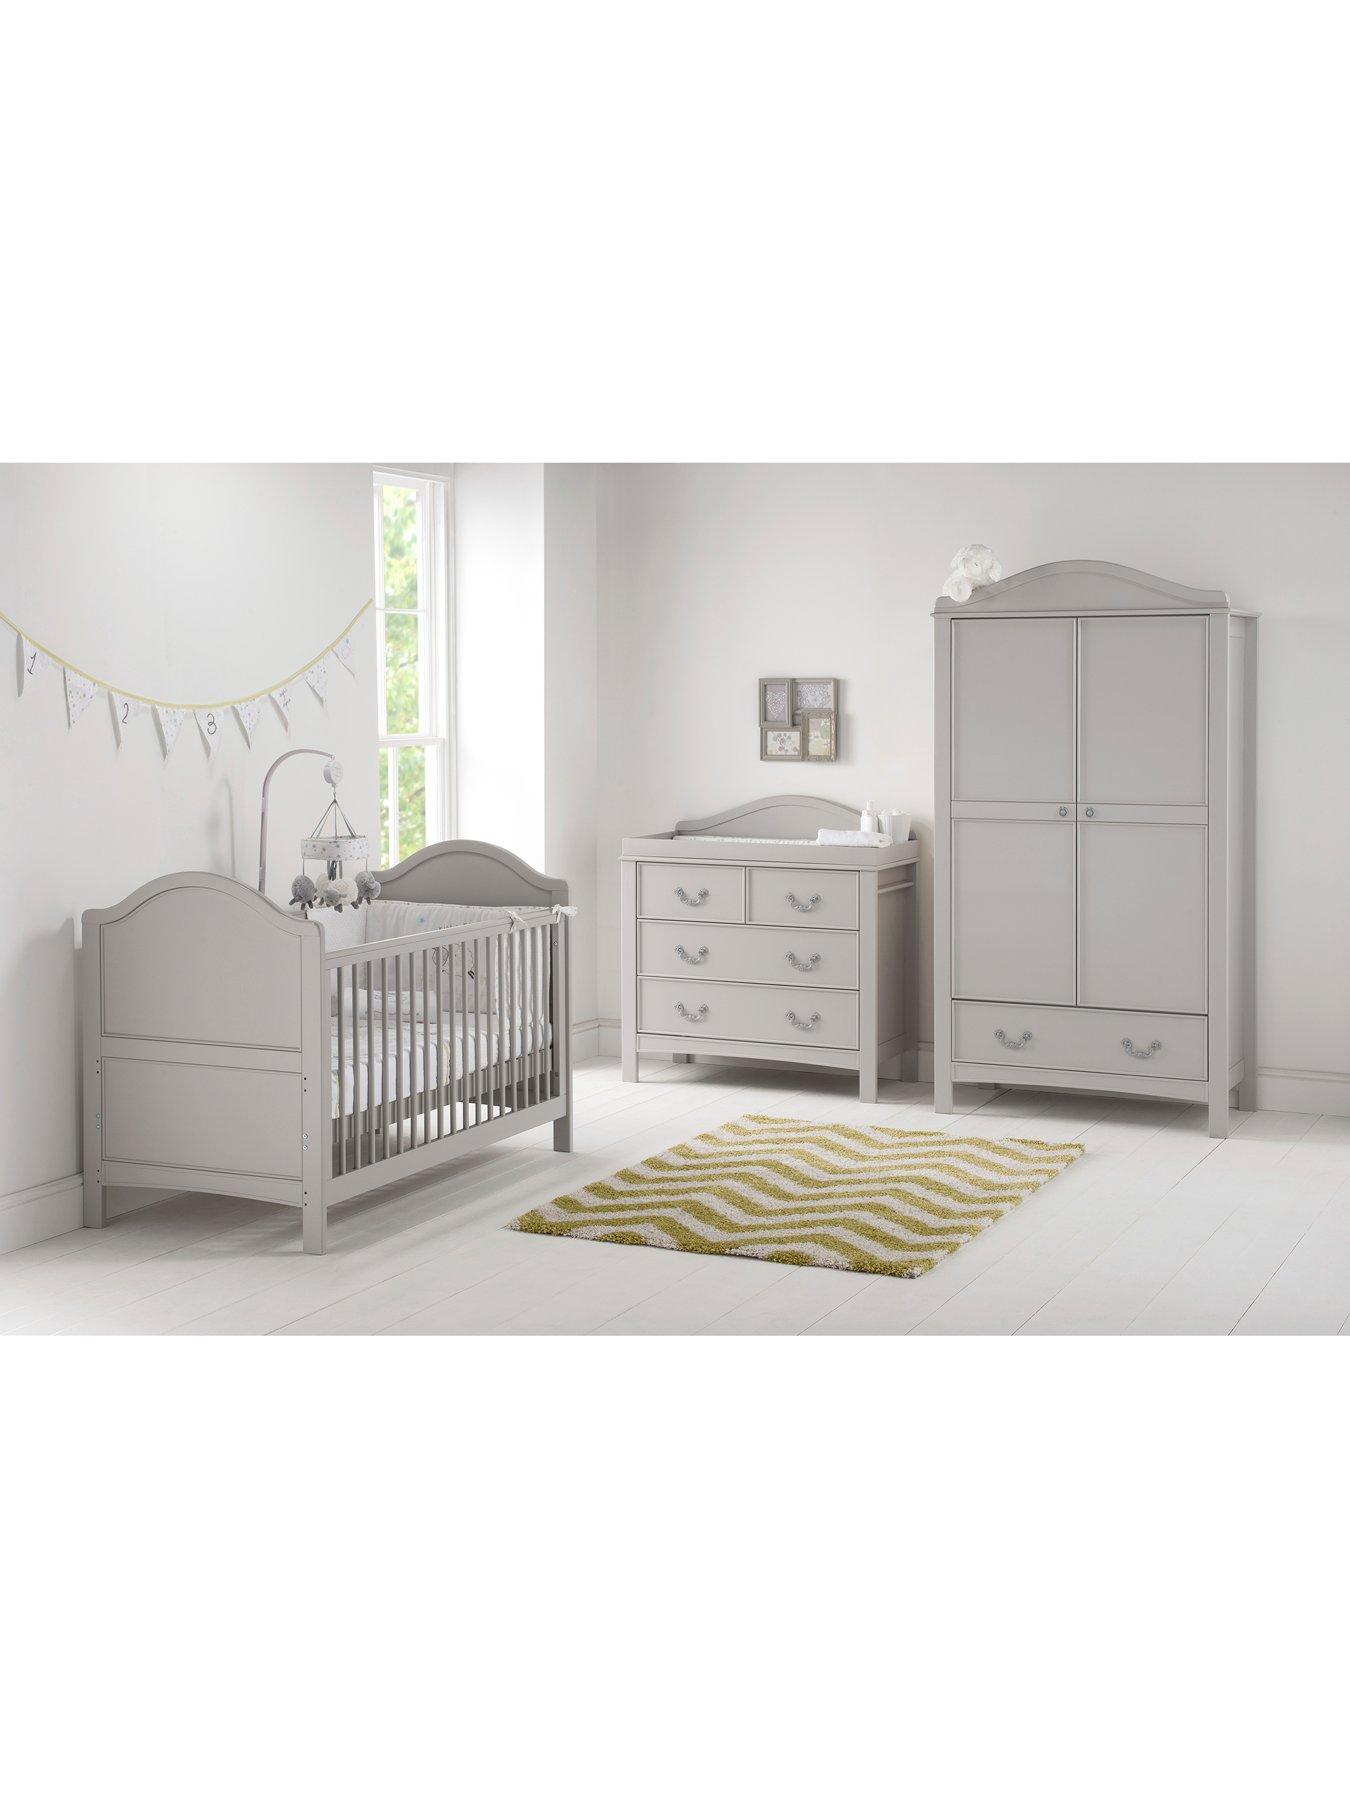 East Coast Toulouse Cot Bed Dresser And Wardrobe Littlewoods Com